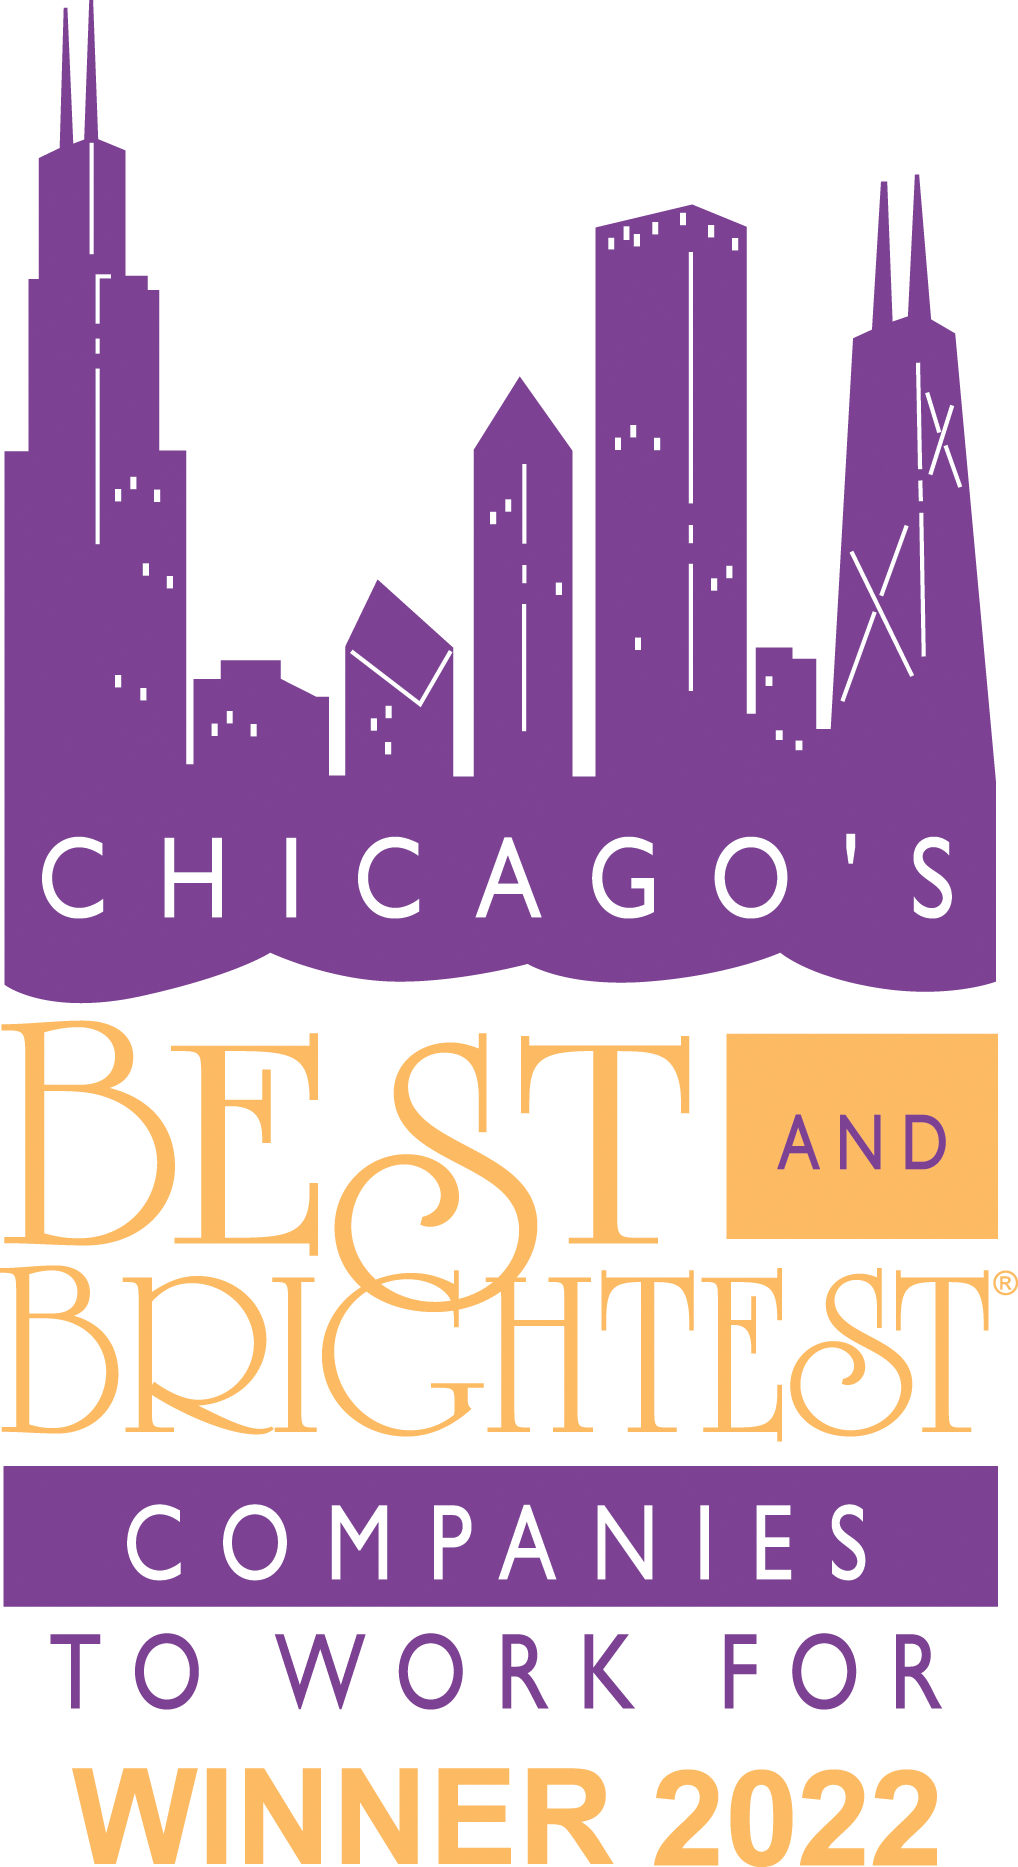 CHICAGO’S BEST AND BRIGHTEST COMPANIES TO WORK FOR IN 2022